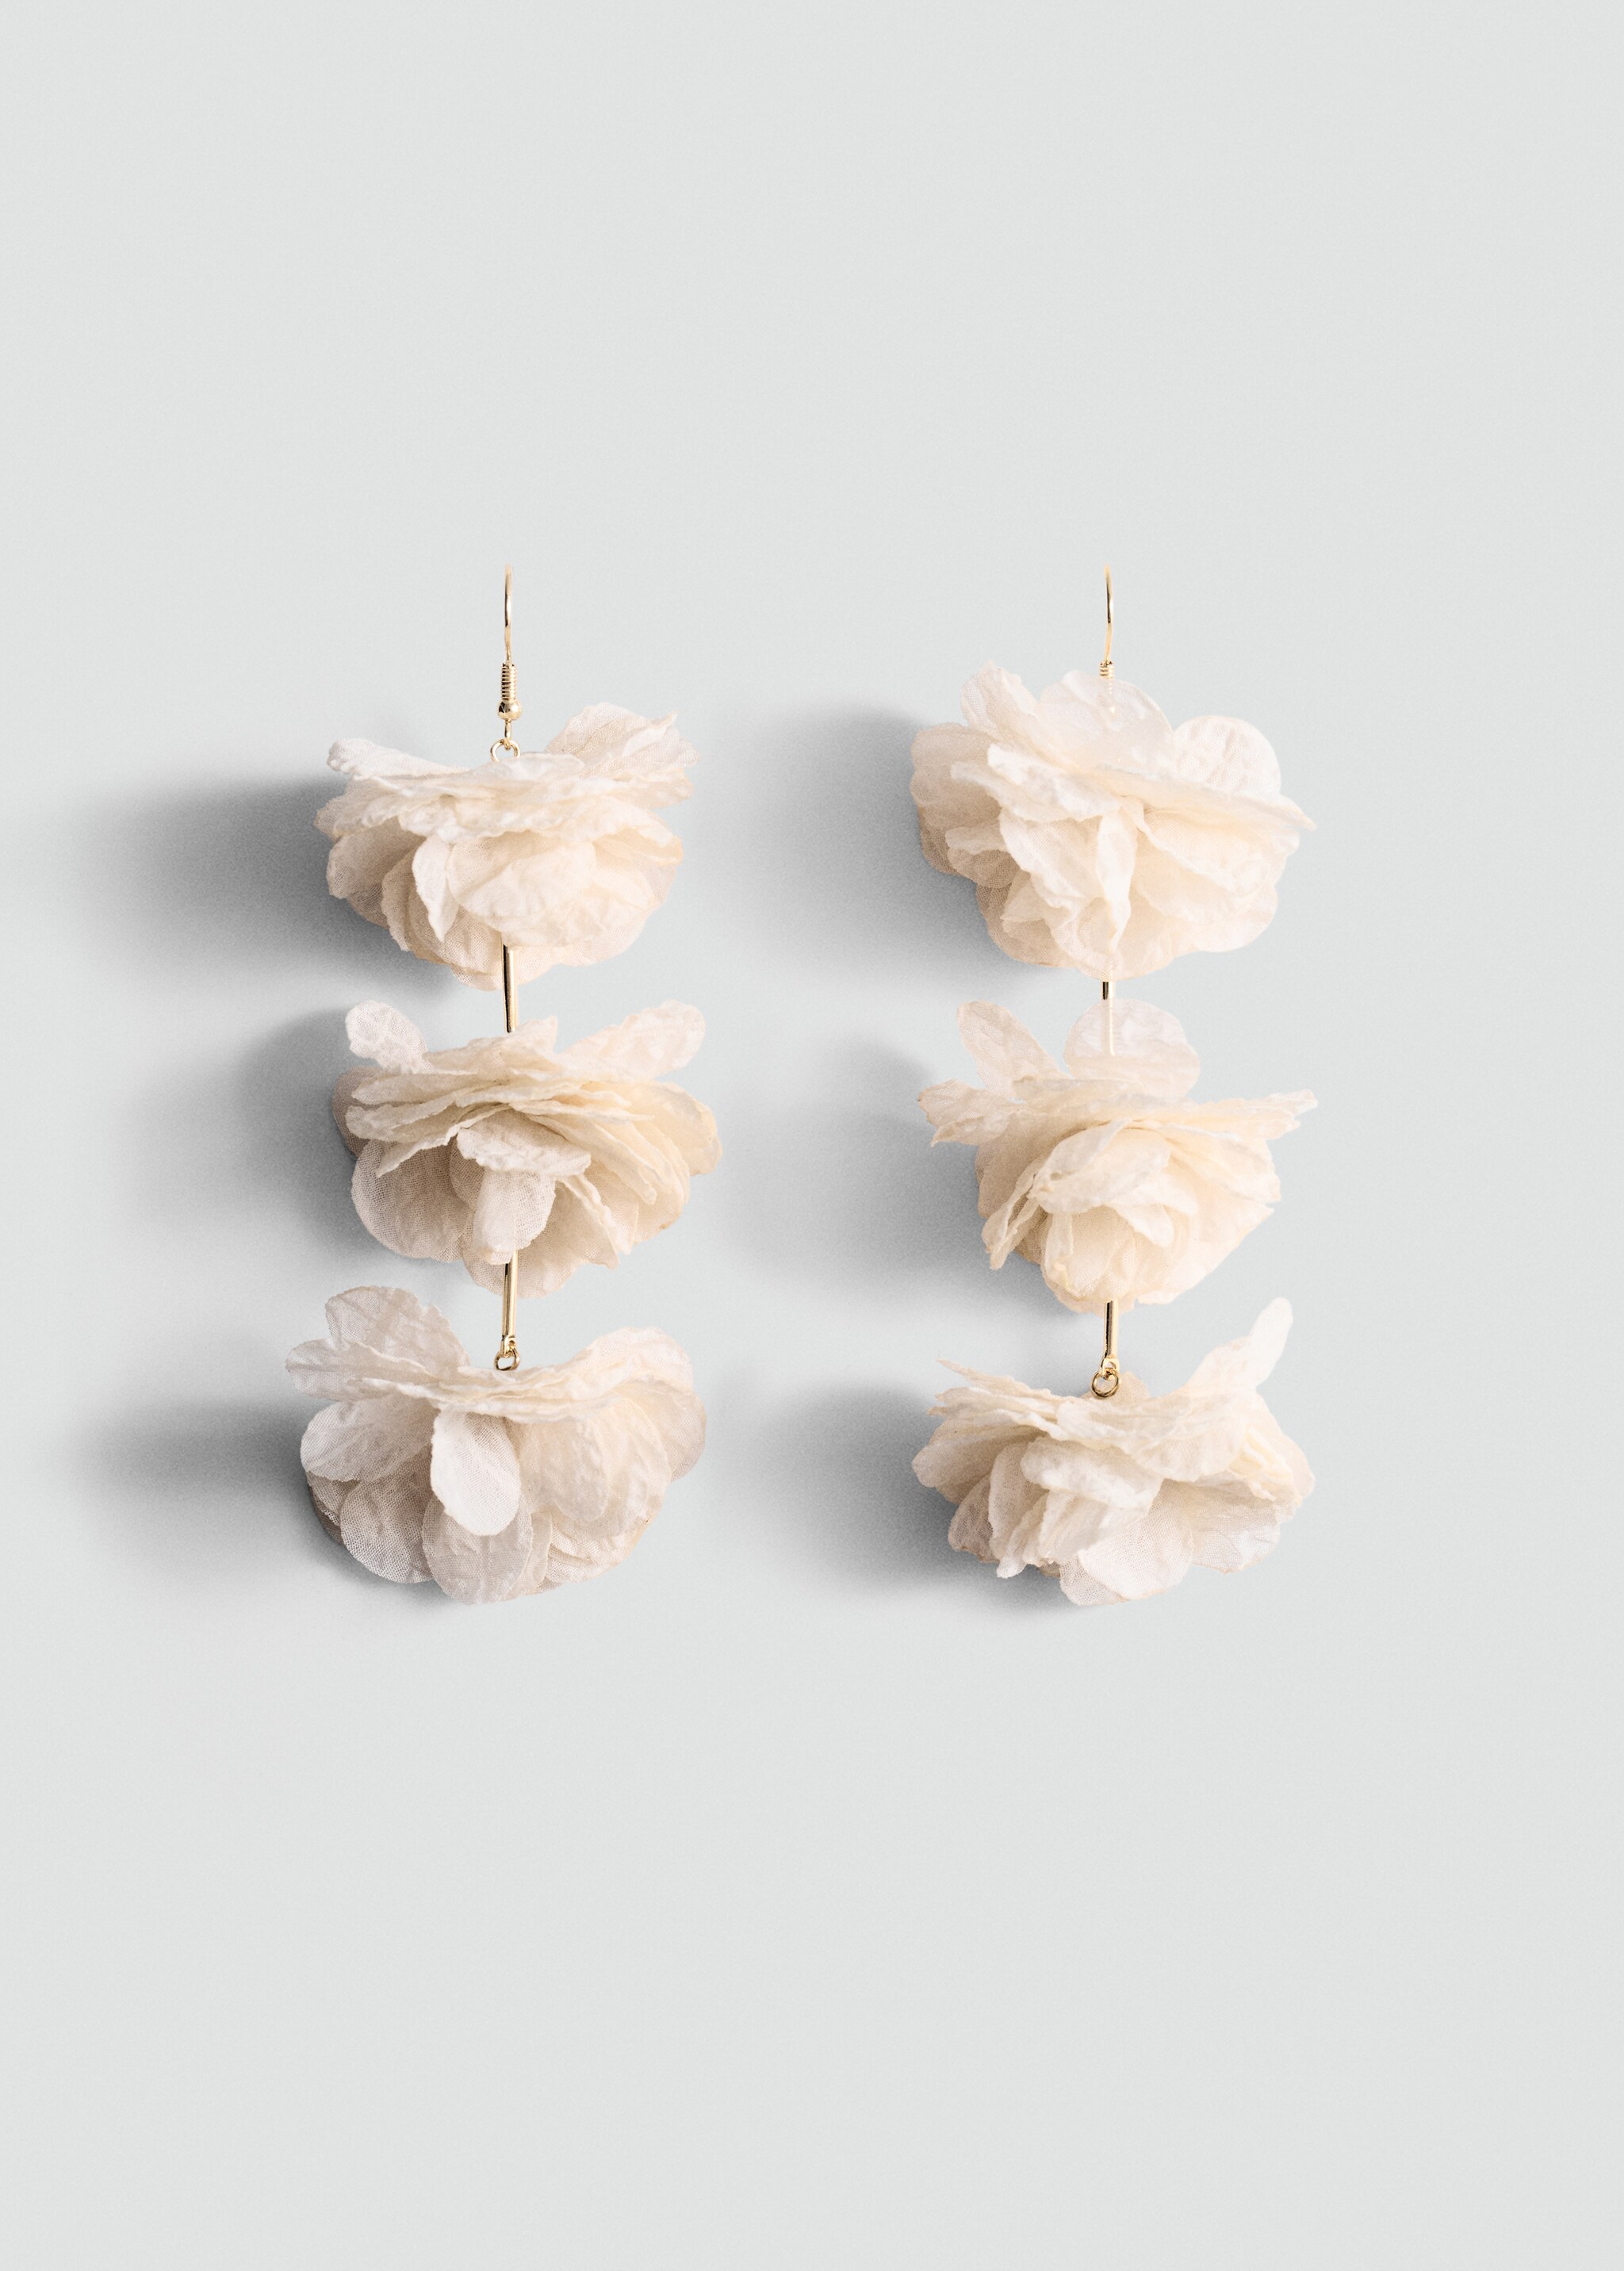 Flower pendant earrings - Article without model